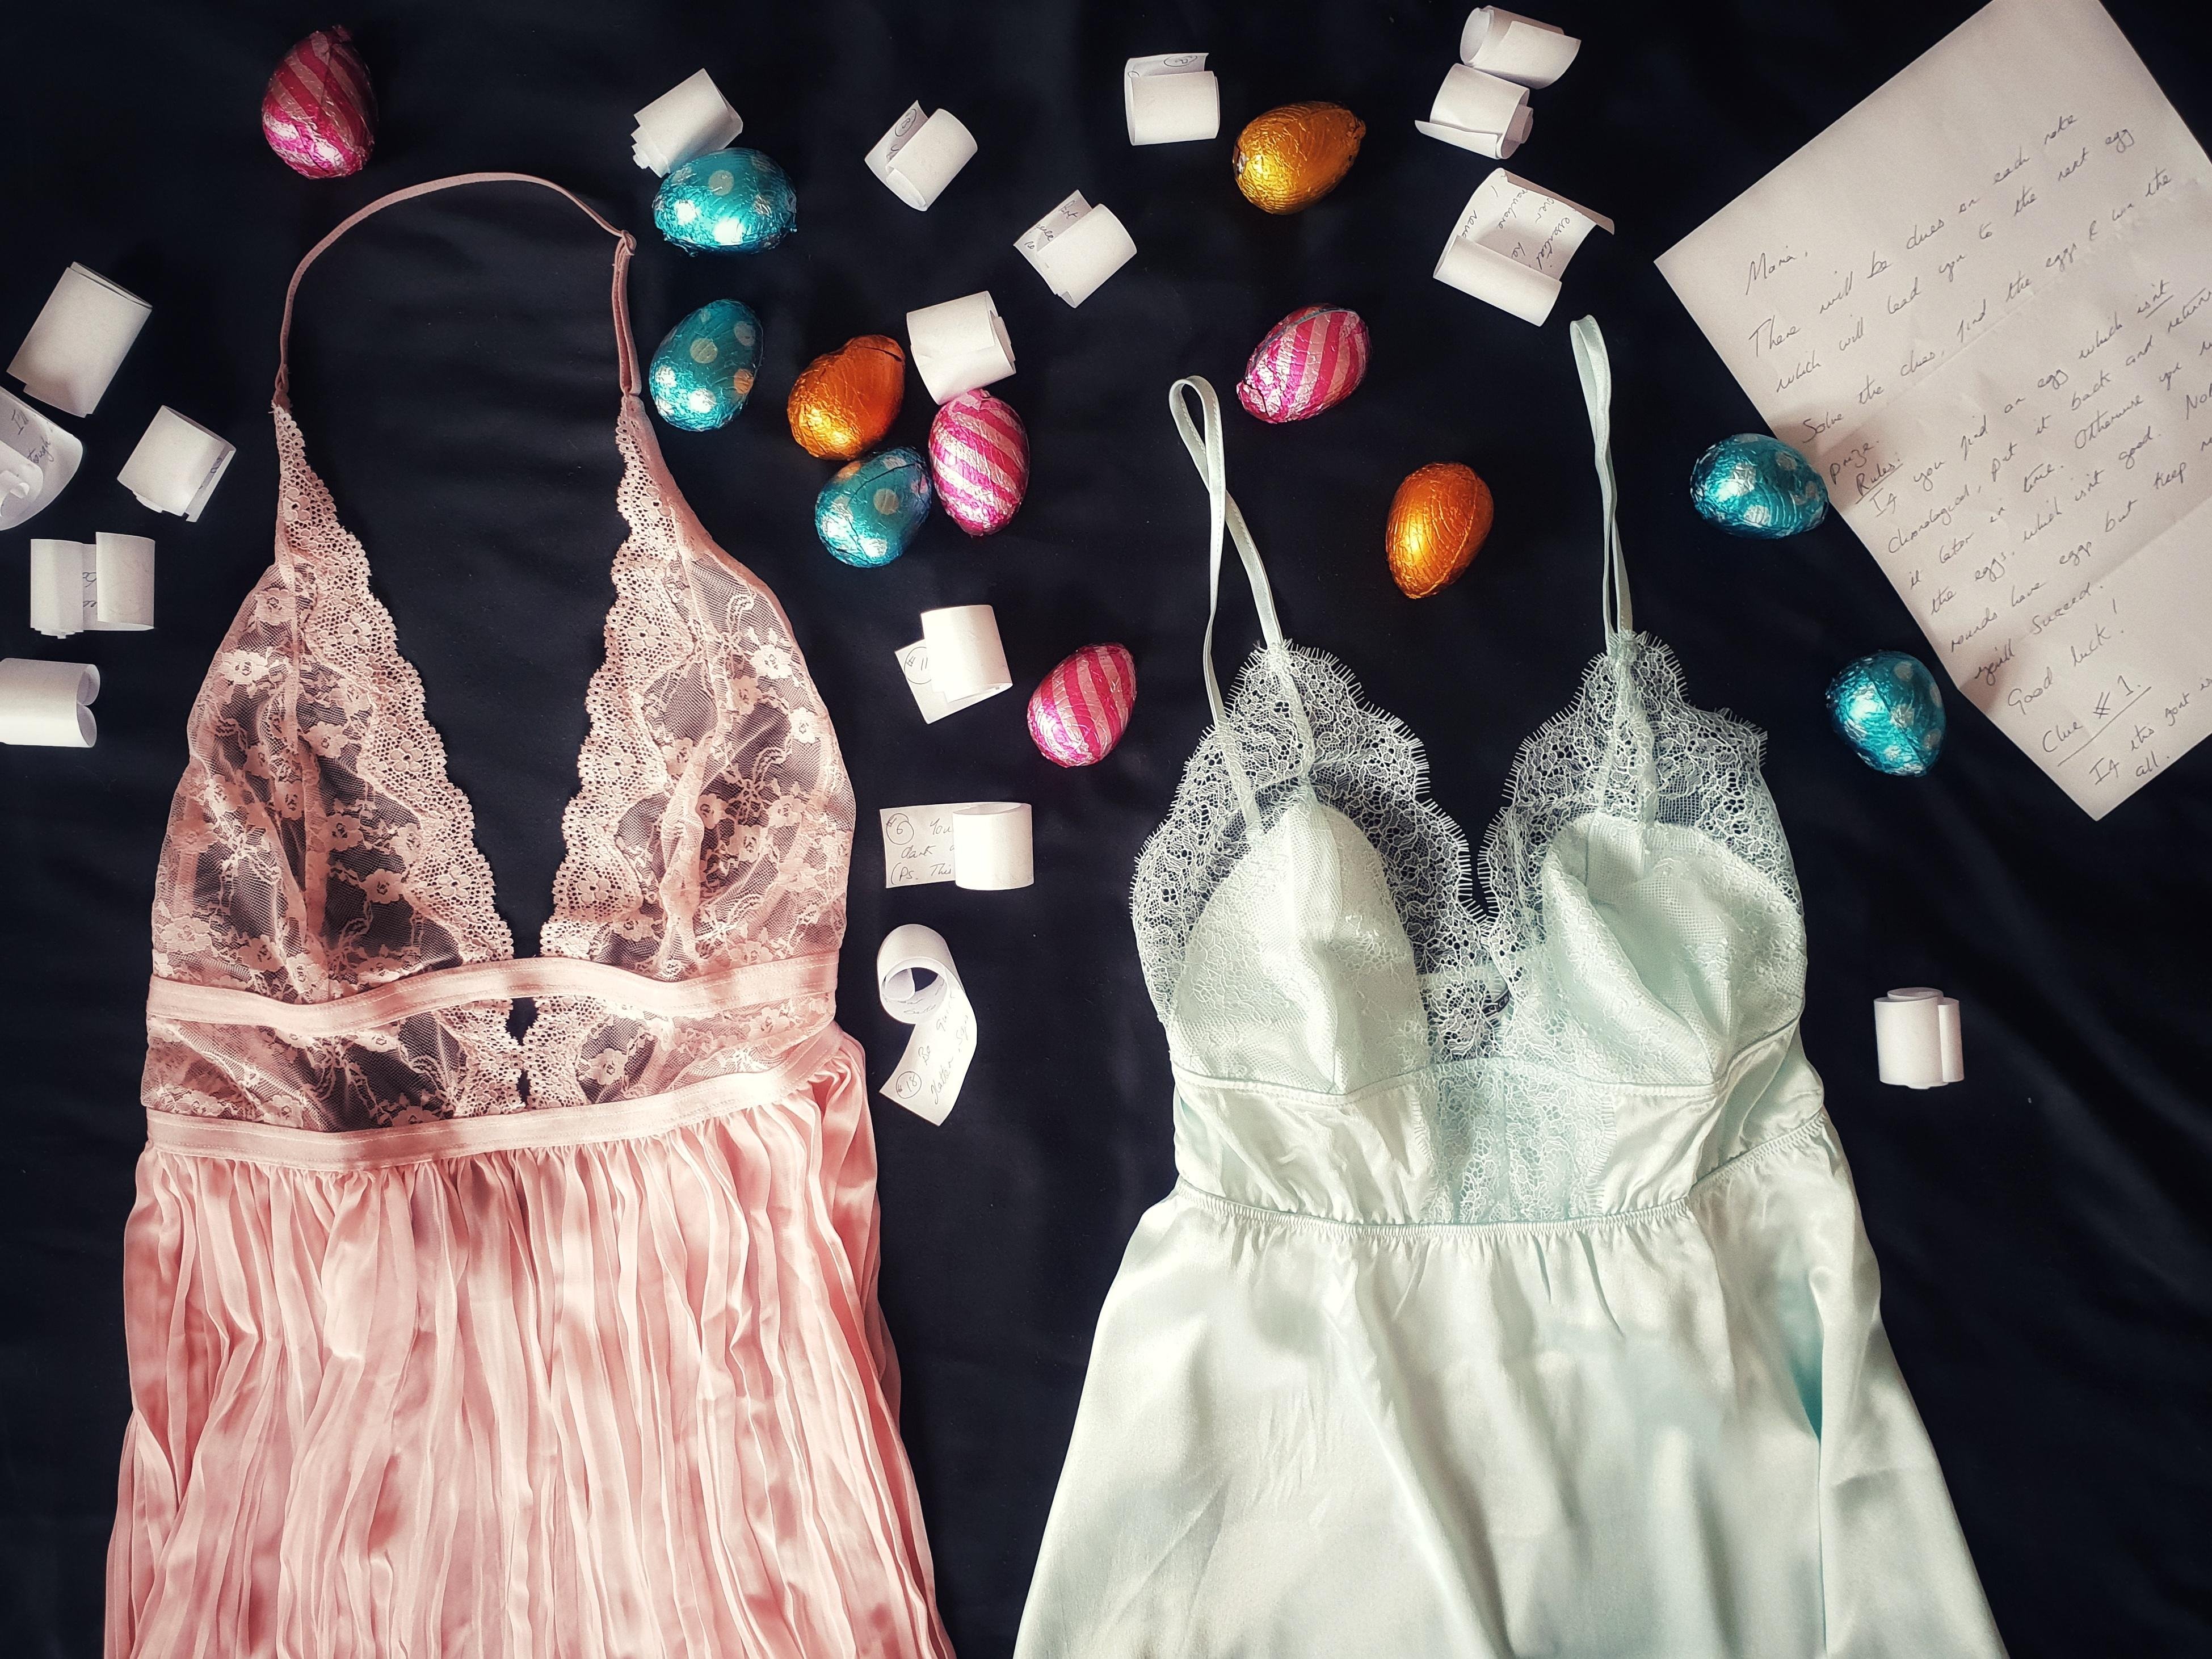 My little girl has never had an easter egg hunt. Today I gave her a belated, 24 clue around-the-house hunt with lingerie as the prize. She won and made me proud!